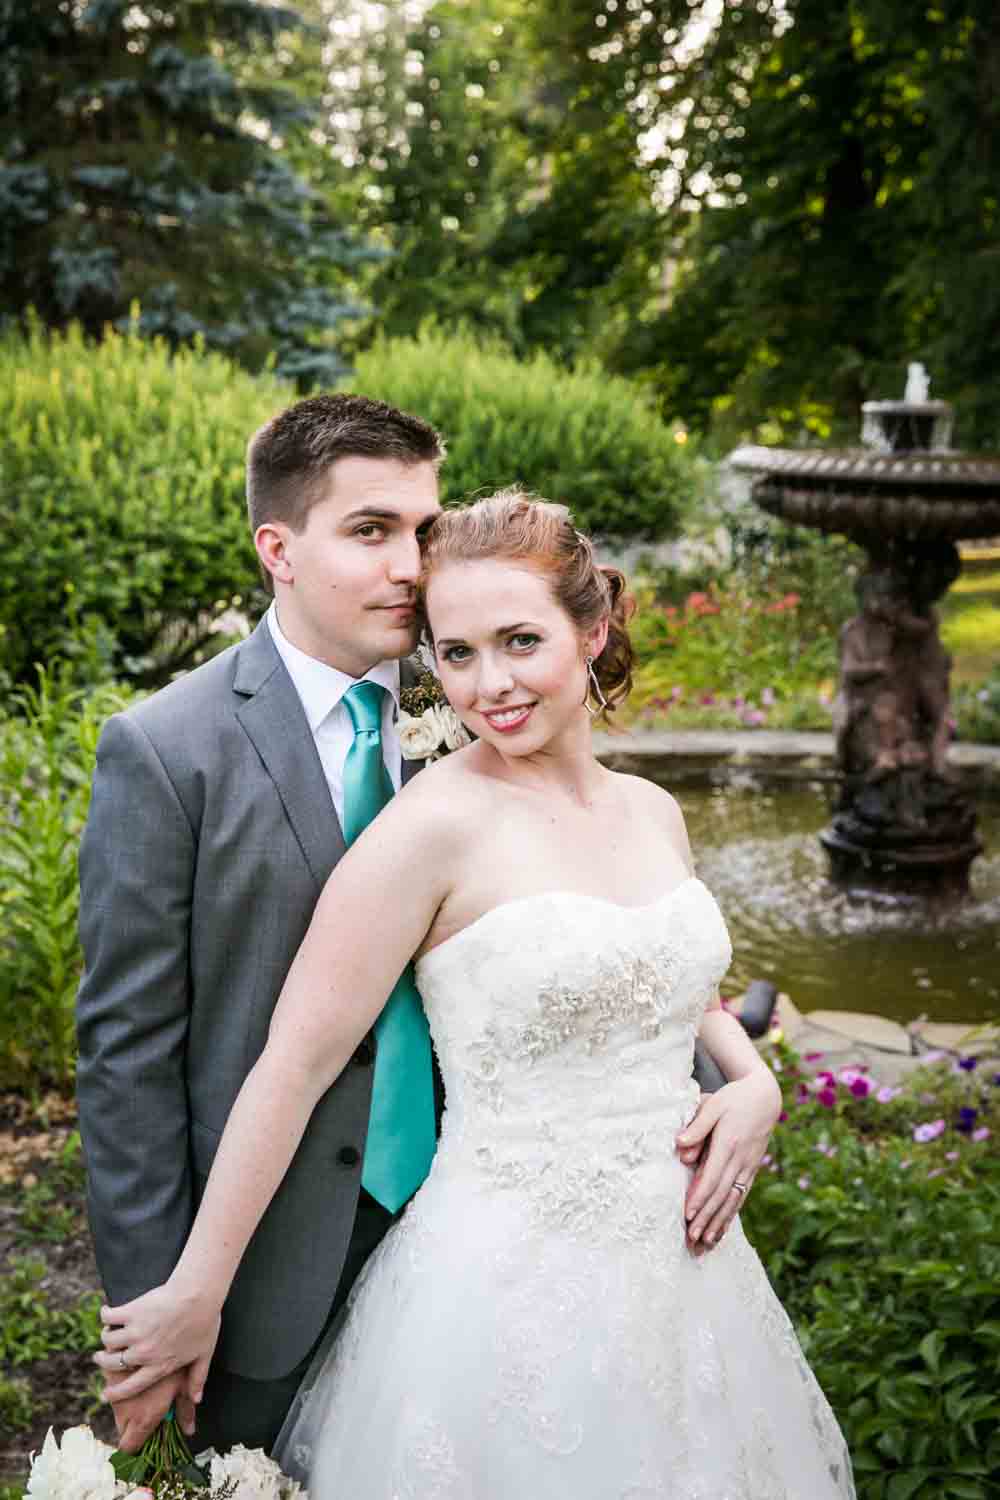 Bride and groom in garden at a Round Hill House wedding